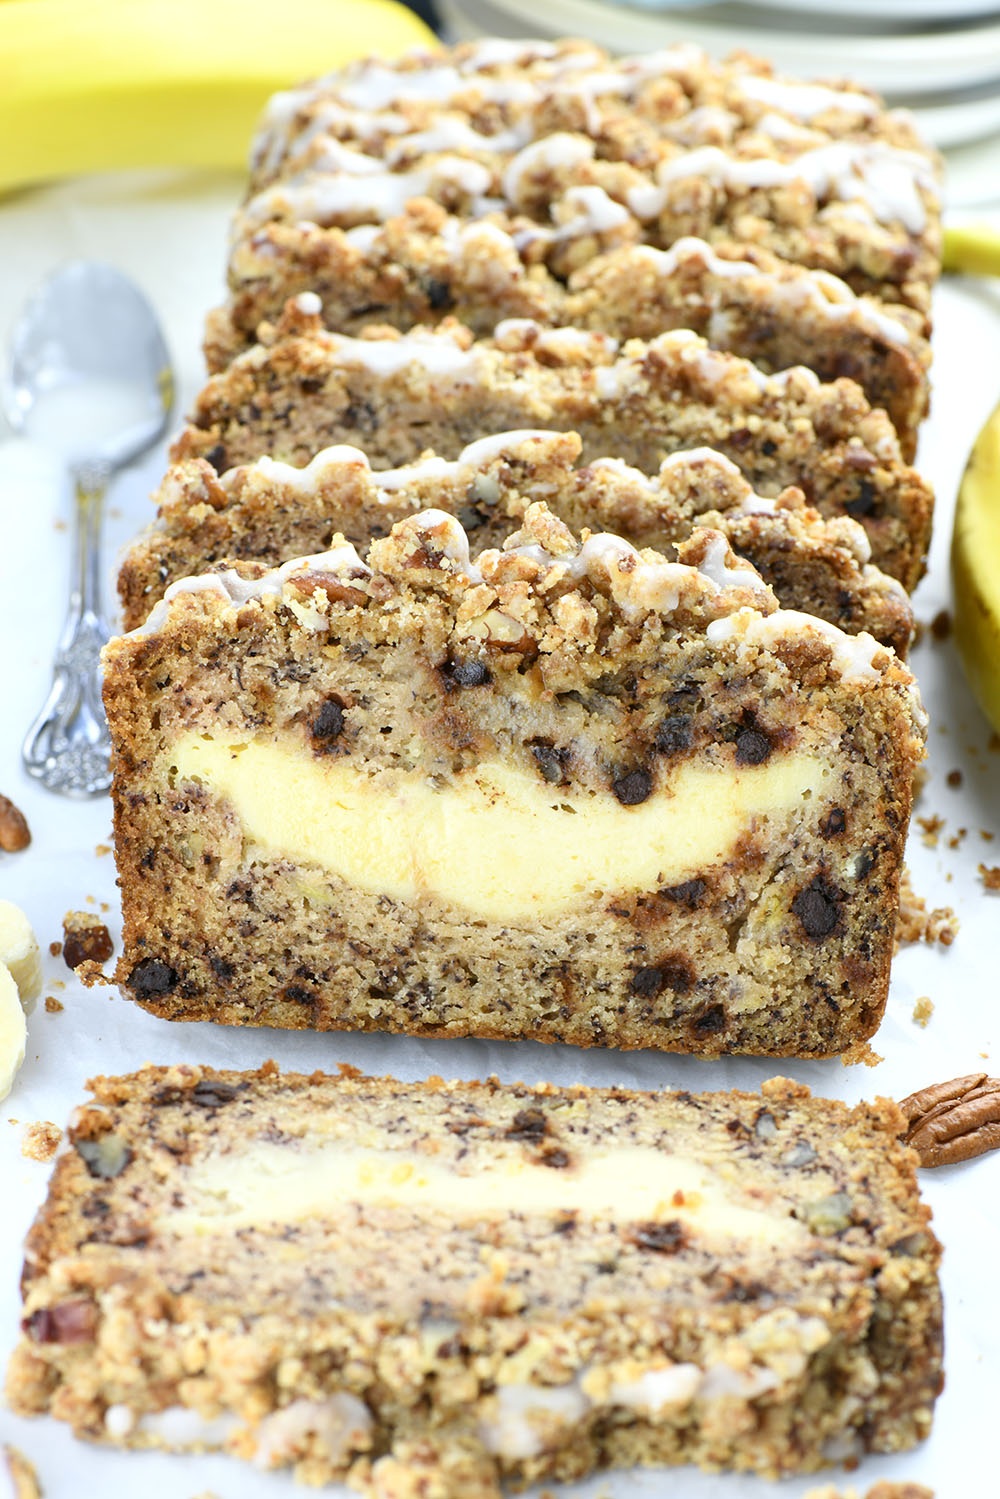 This comic specie stuffed with surf cheese filling, chocolate chips, and pecans with irresistible cinnamon streusel is increasingly like succulent comic coffee cake, just baked in a loaf pan.